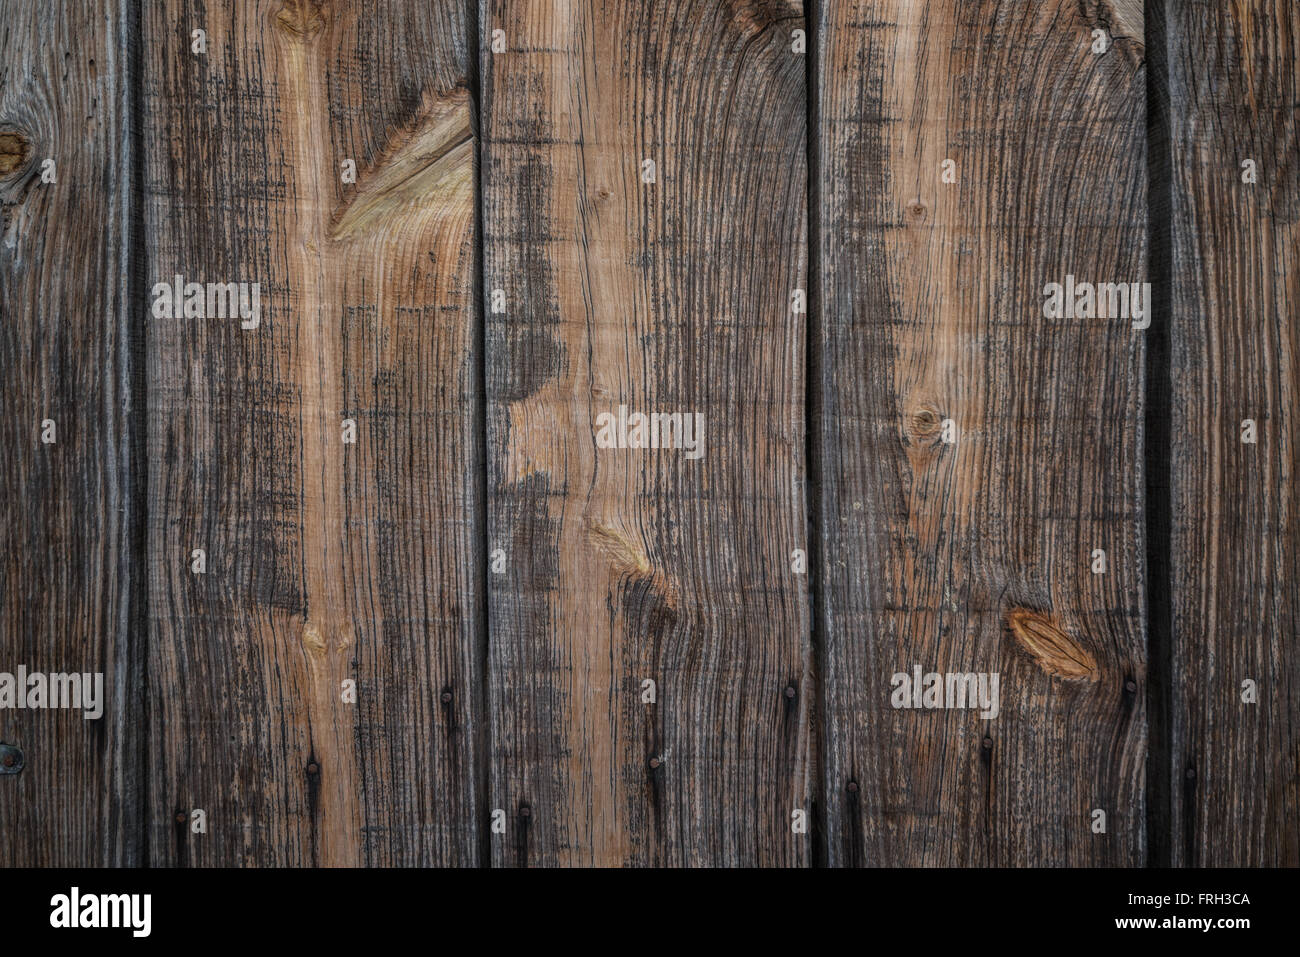 close up of wall made of wooden planks Stock Photo